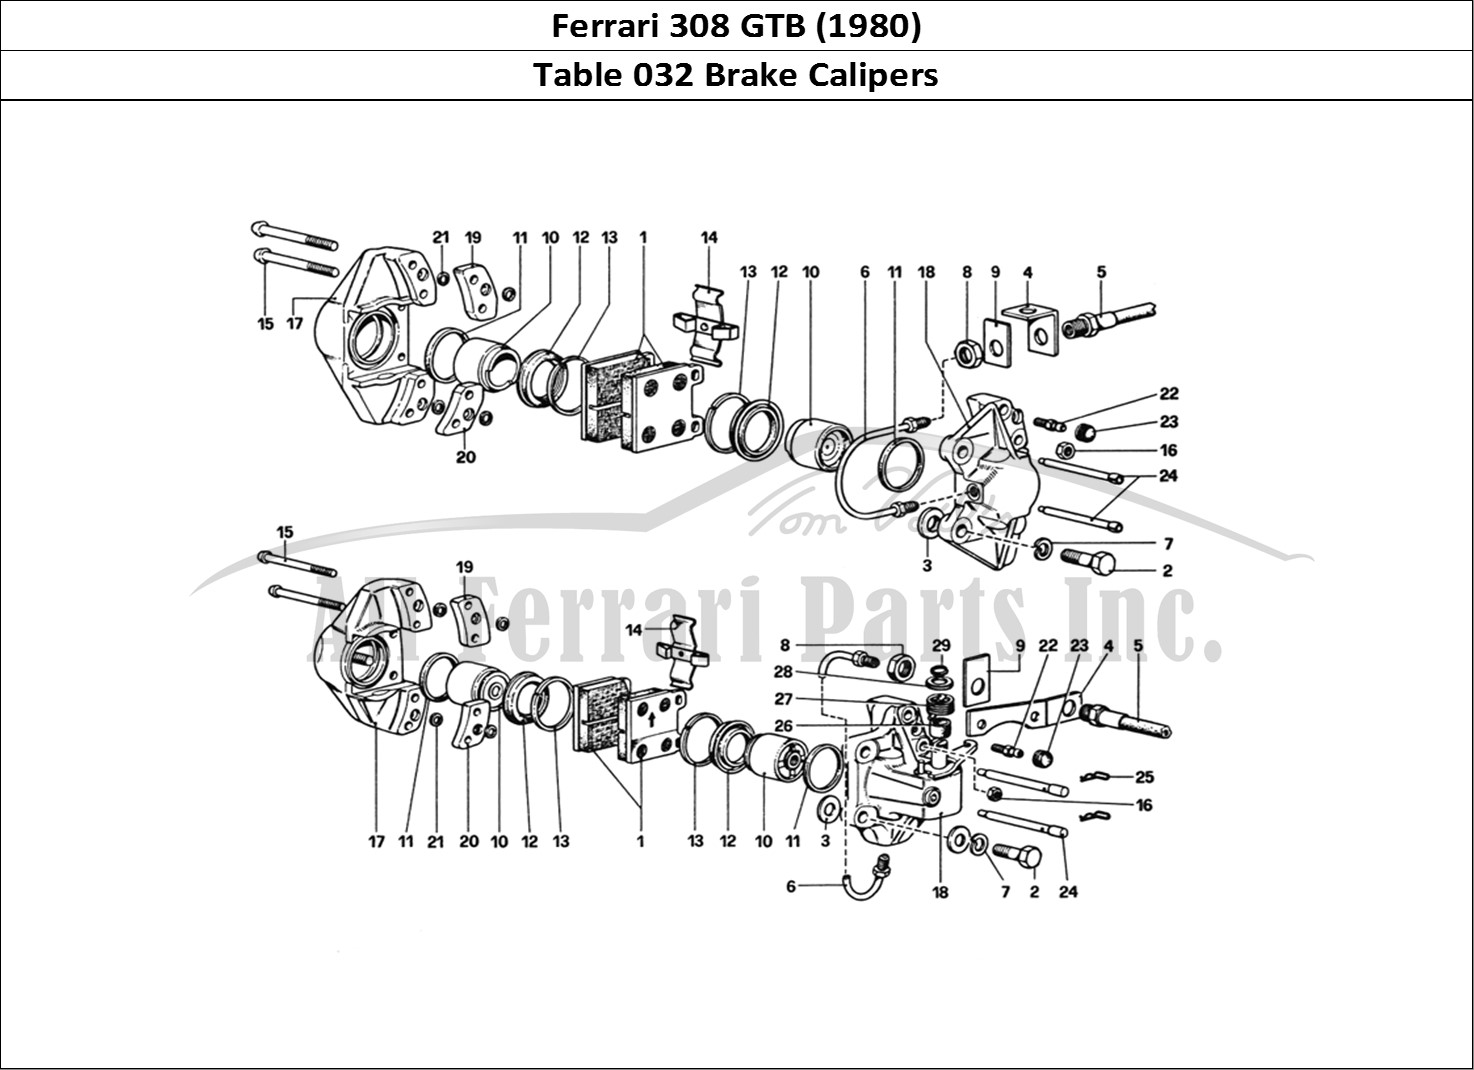 Ferrari Parts Ferrari 308 GTB (1980) Page 032 Calipers for Front and Re